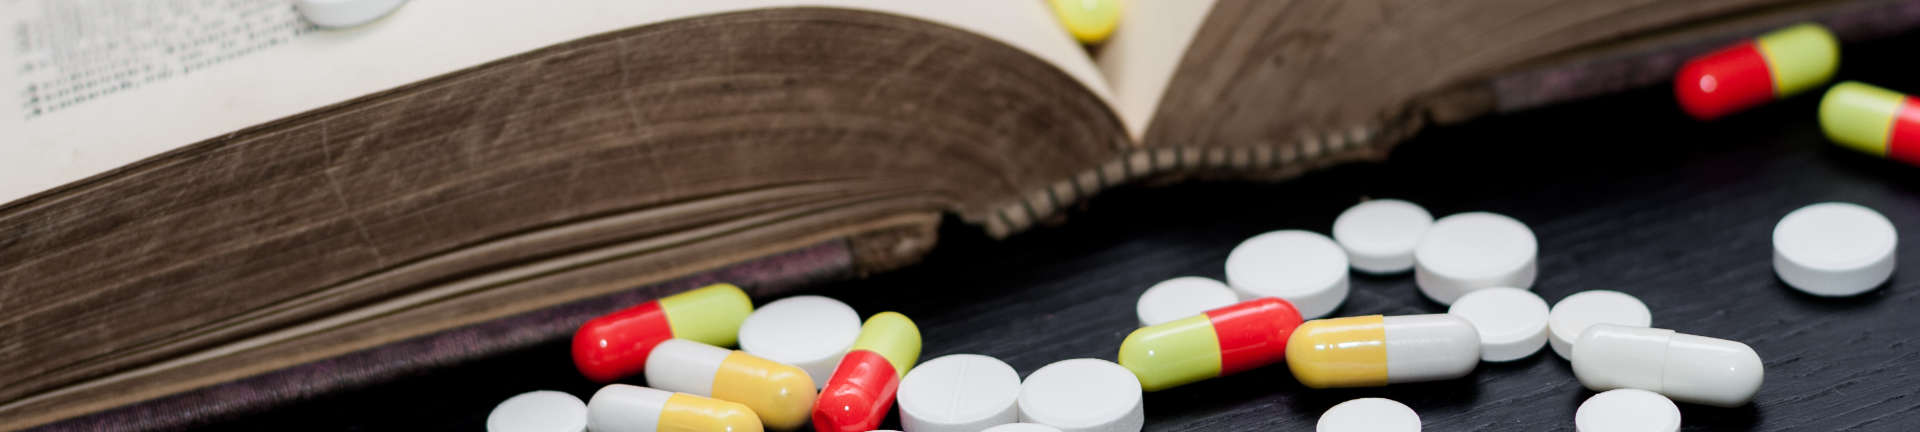 medicines and an open book